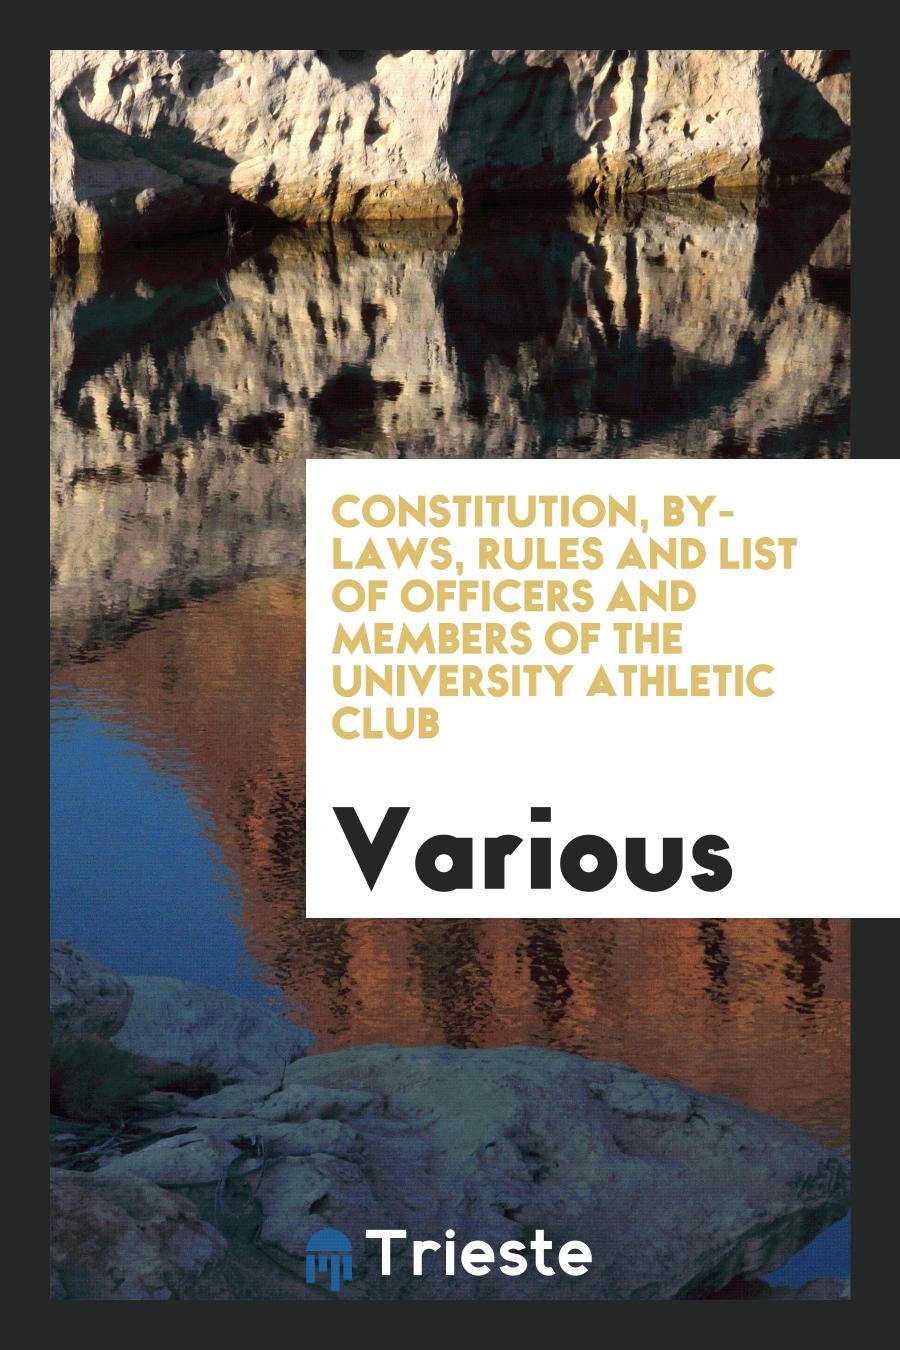 Constitution, By-laws, Rules and List of Officers and Members of the University Athletic Club